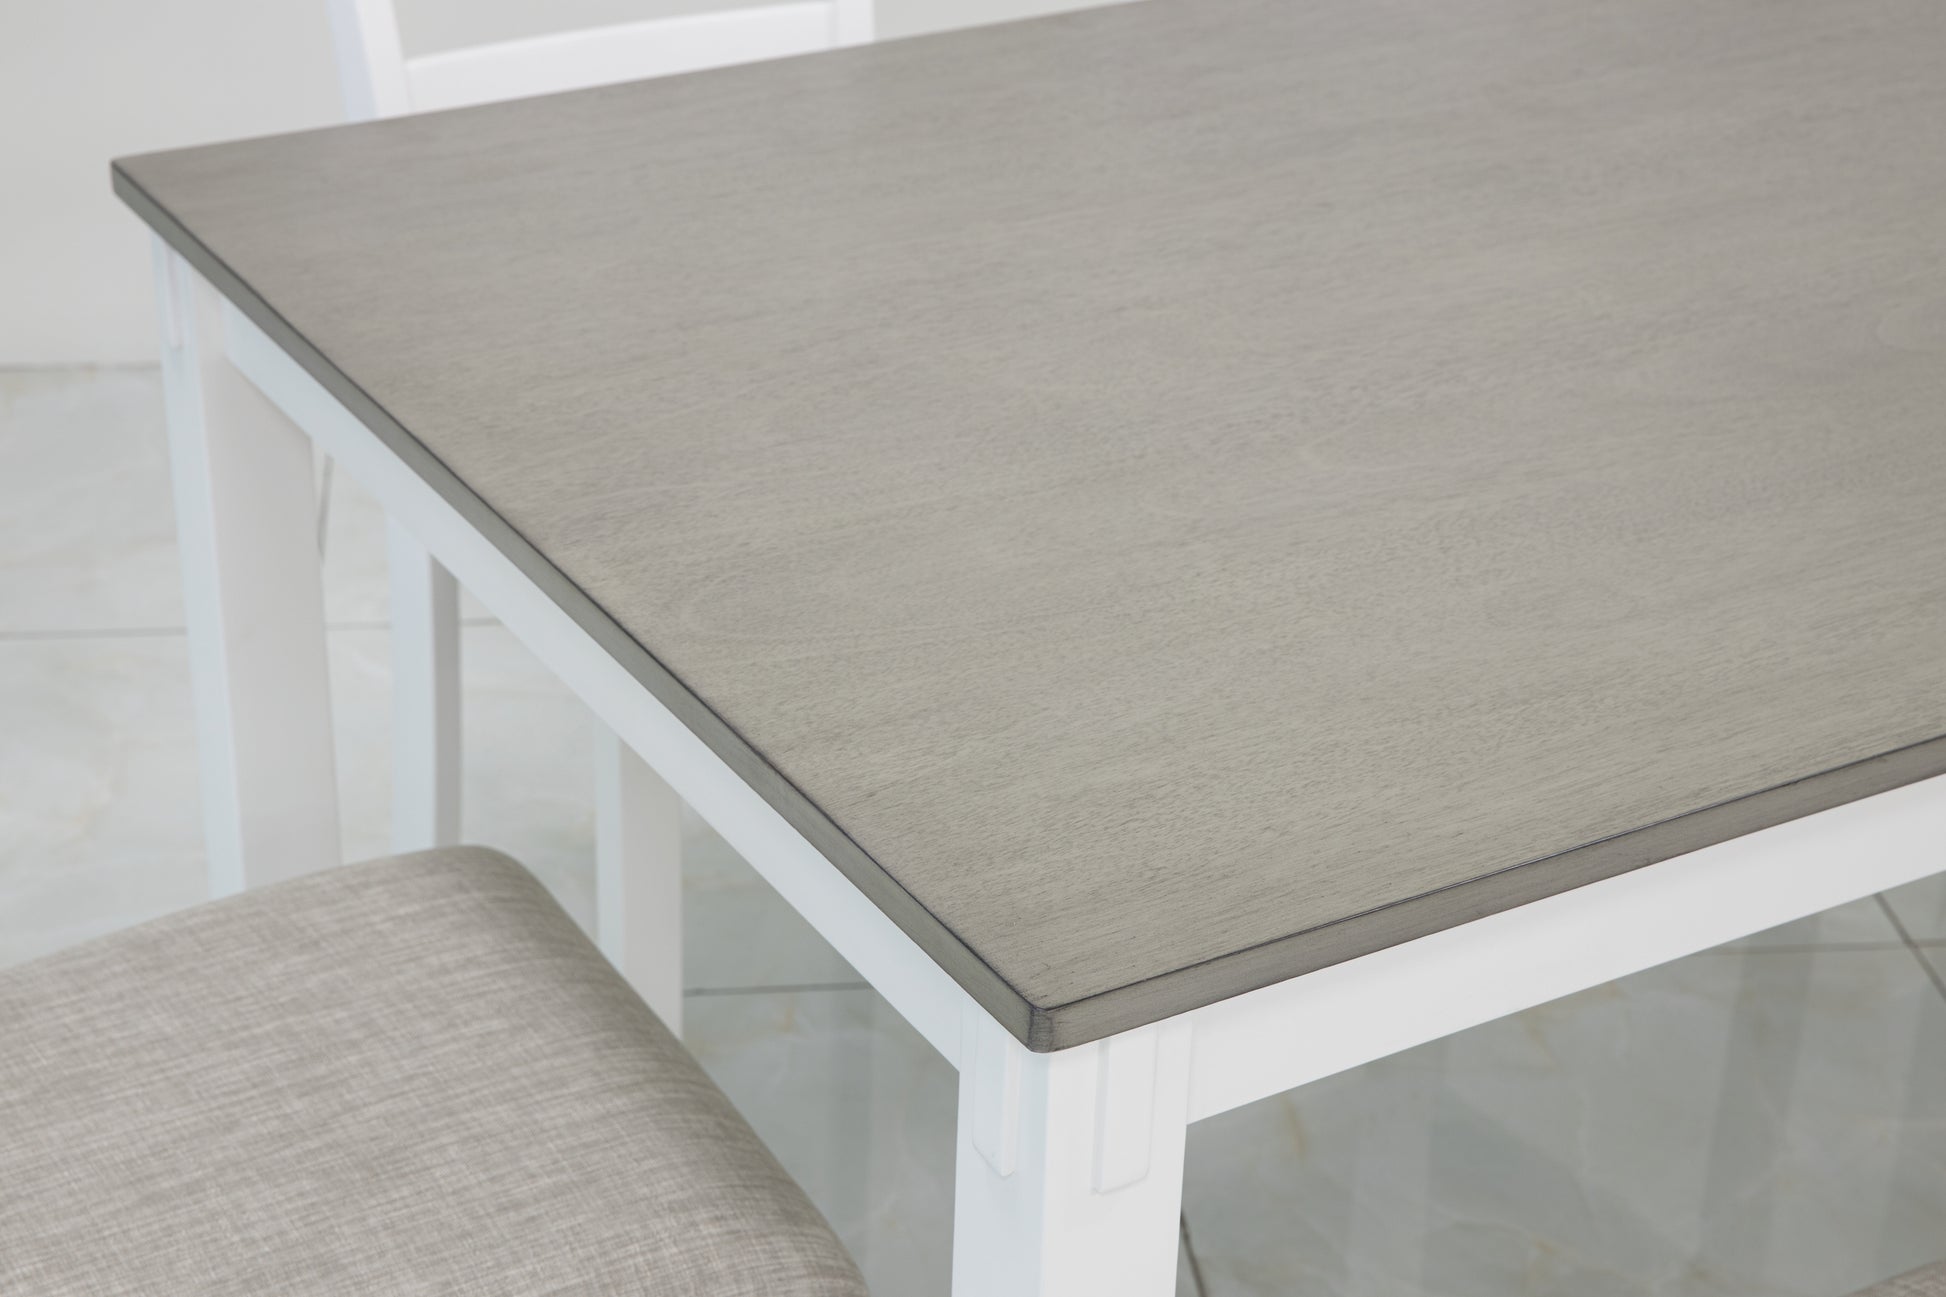 Stonehollow RECT DRM Table Set (6/CN) Signature Design by Ashley®